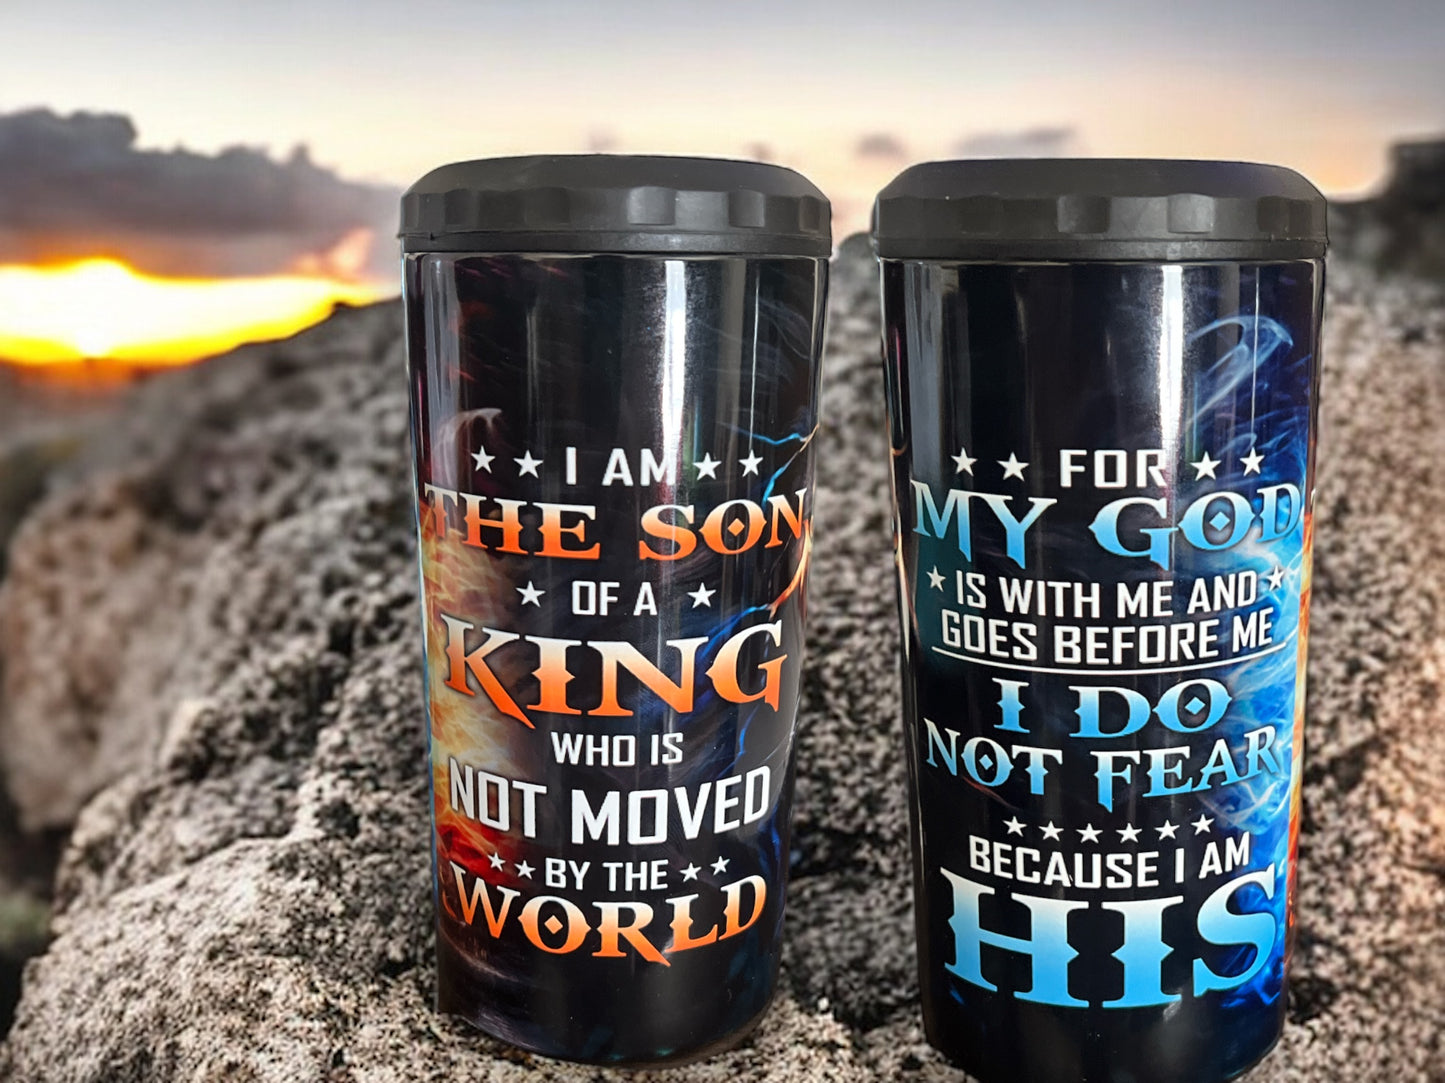 4 in 1 Bottle and Can Holder and Tumbler 16oz- for my God is with me ￼